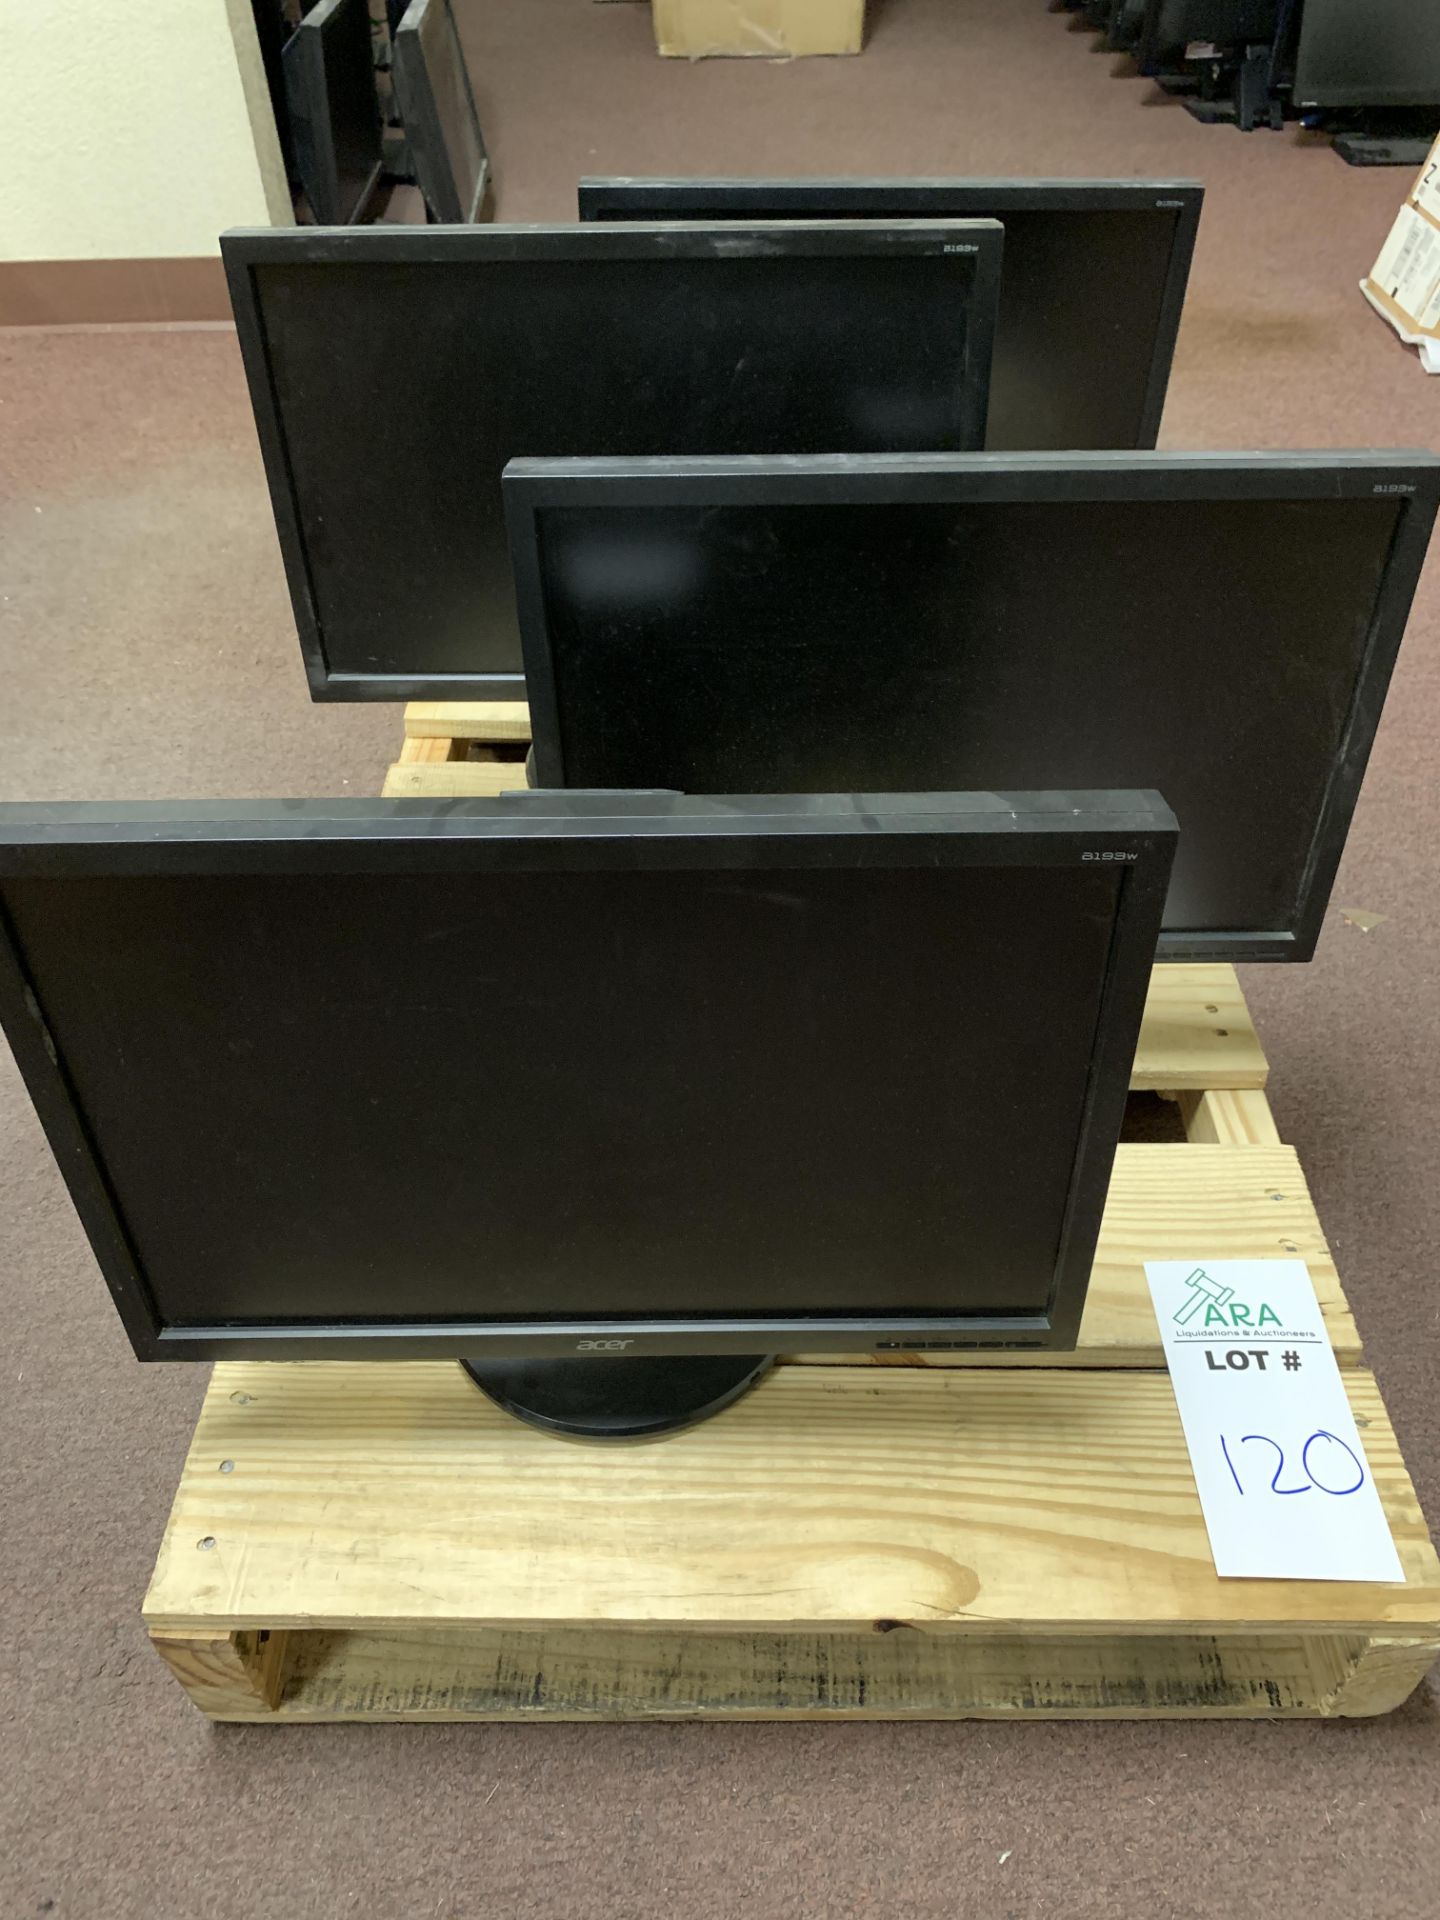 4 ACER B193W COMPUTER MONITORS.   ALL ITEMS ARE SOLD AS IS UNTESTED BUT CAME FROM A WORKING